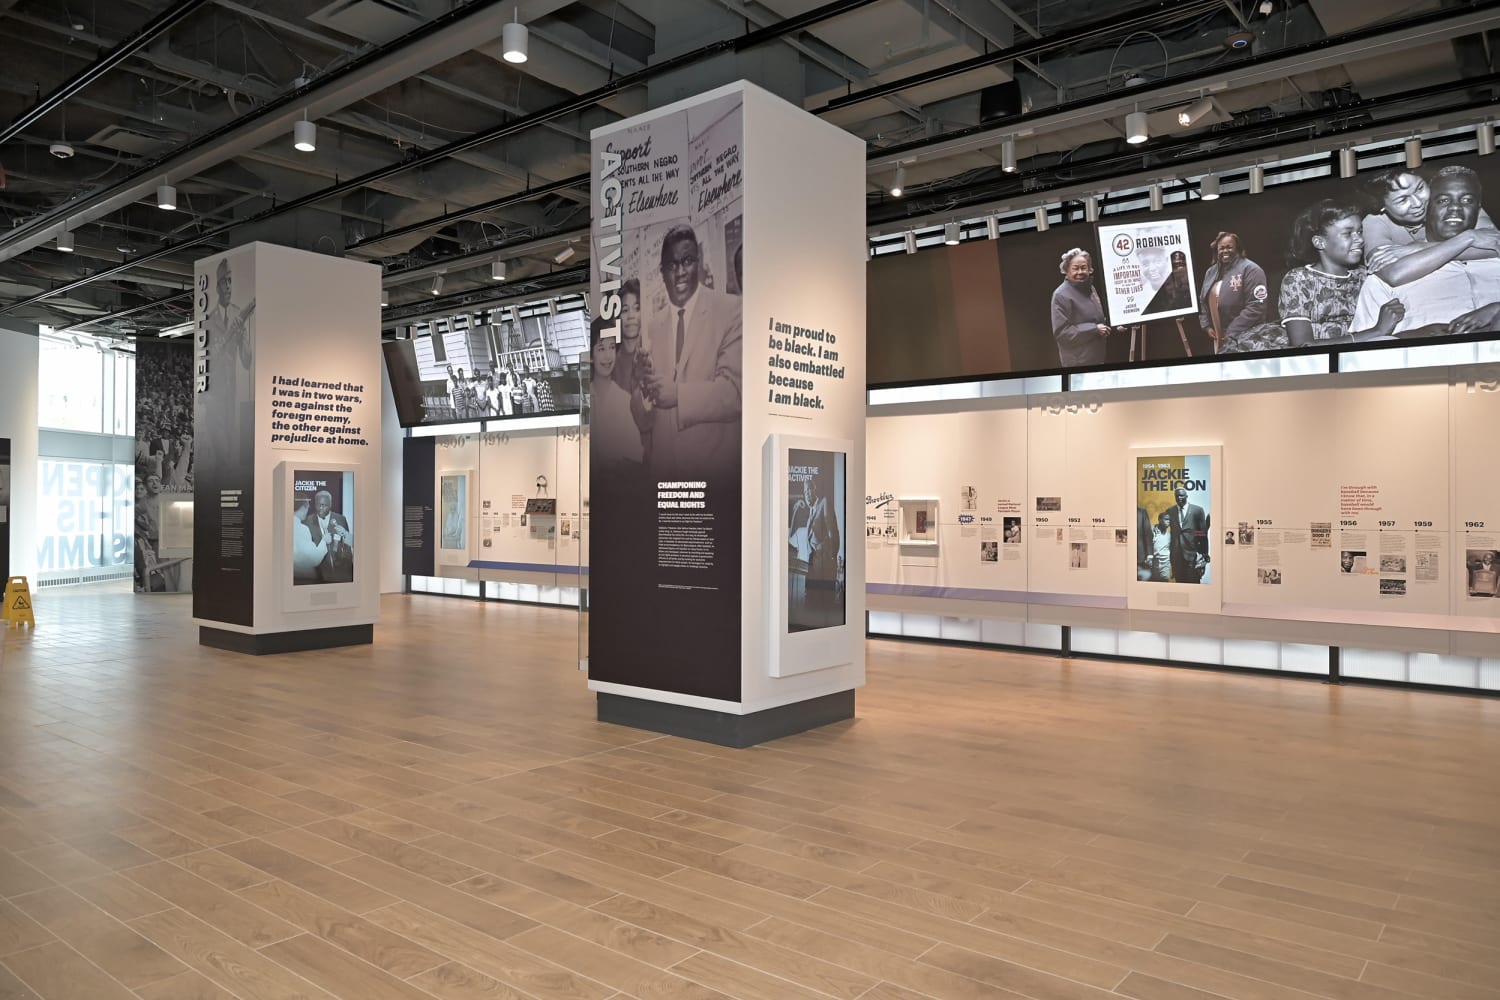 Jackie Robinson Museum Opening in New York, 75 Years After He